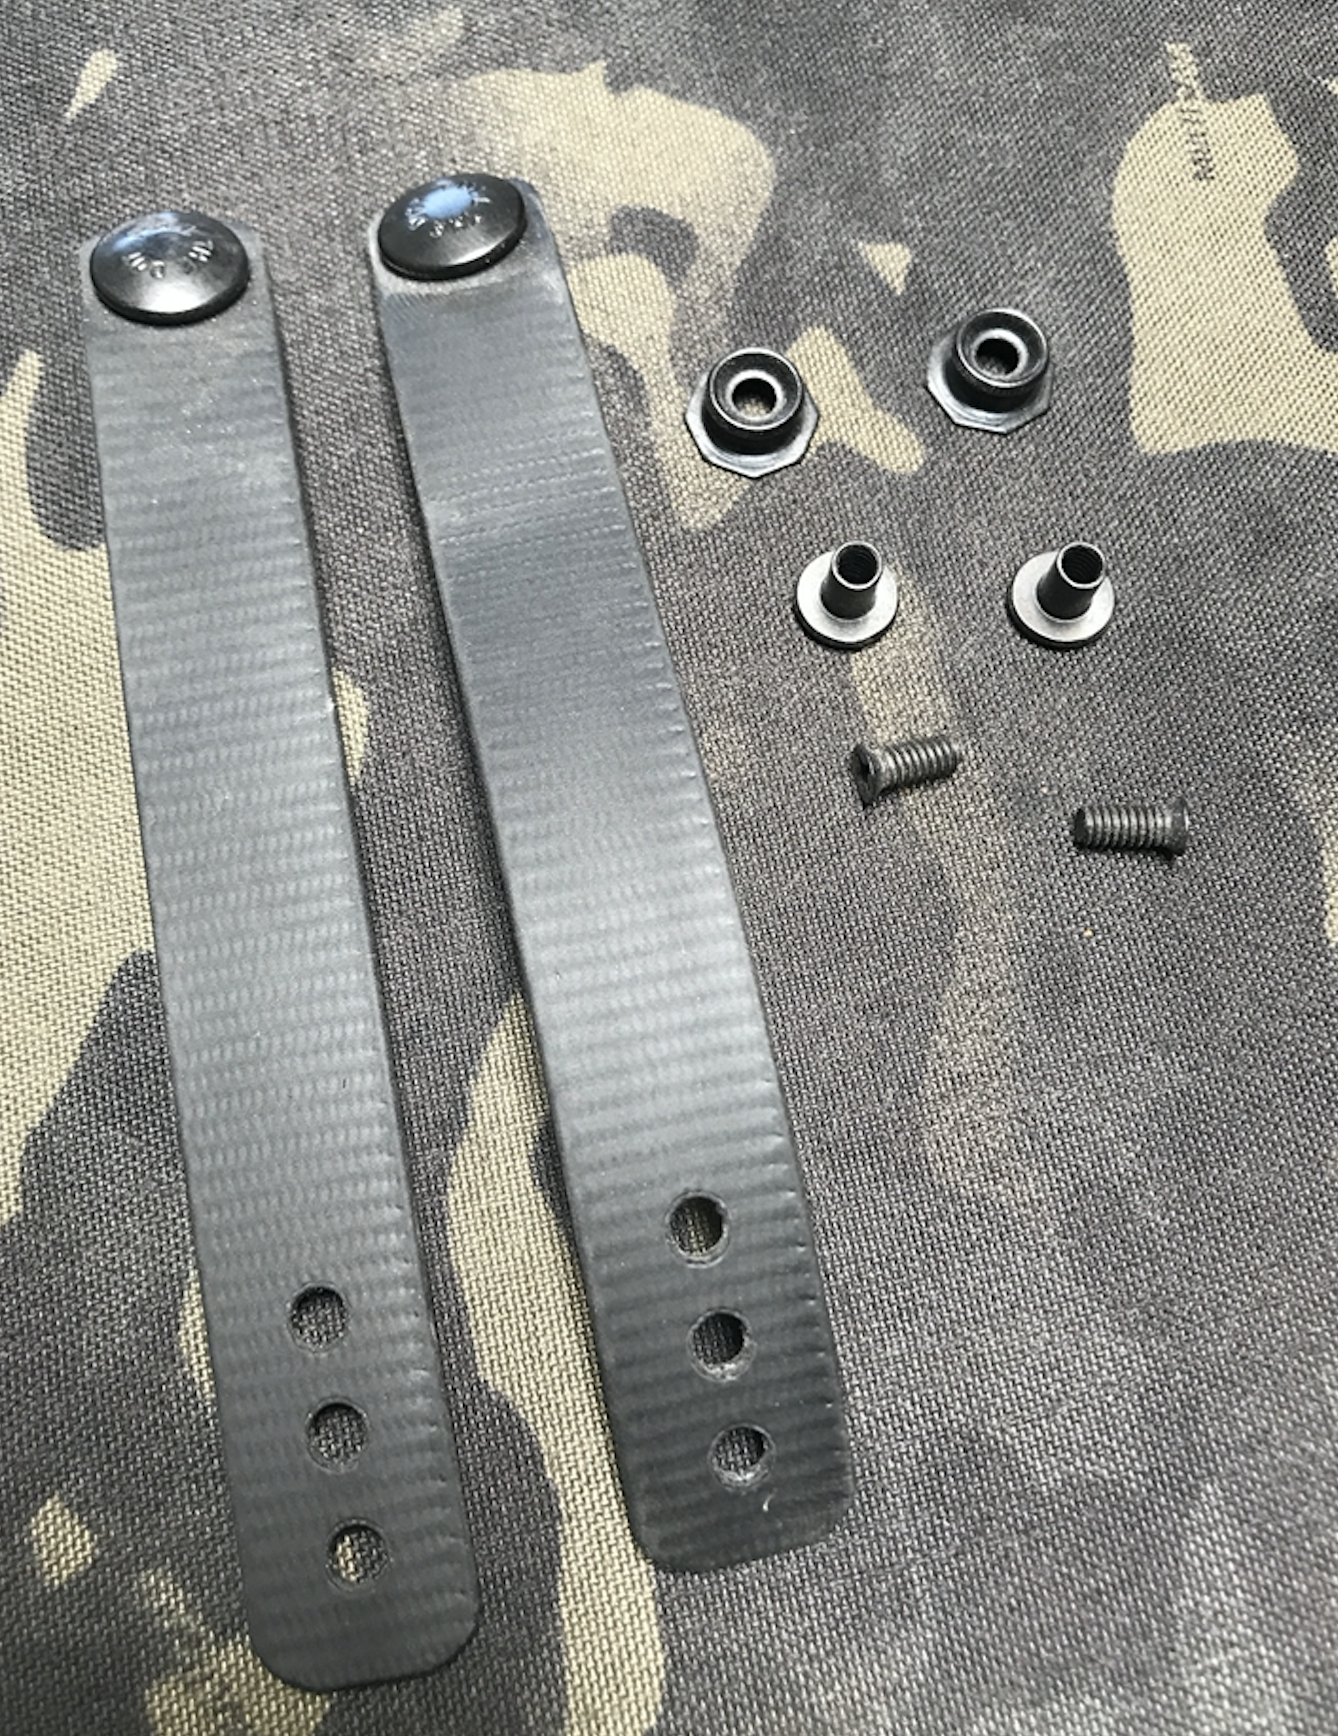 Horizontal belt loops/carry straps) for kydex sheaths, 2 loops per se –  Half Face Blades